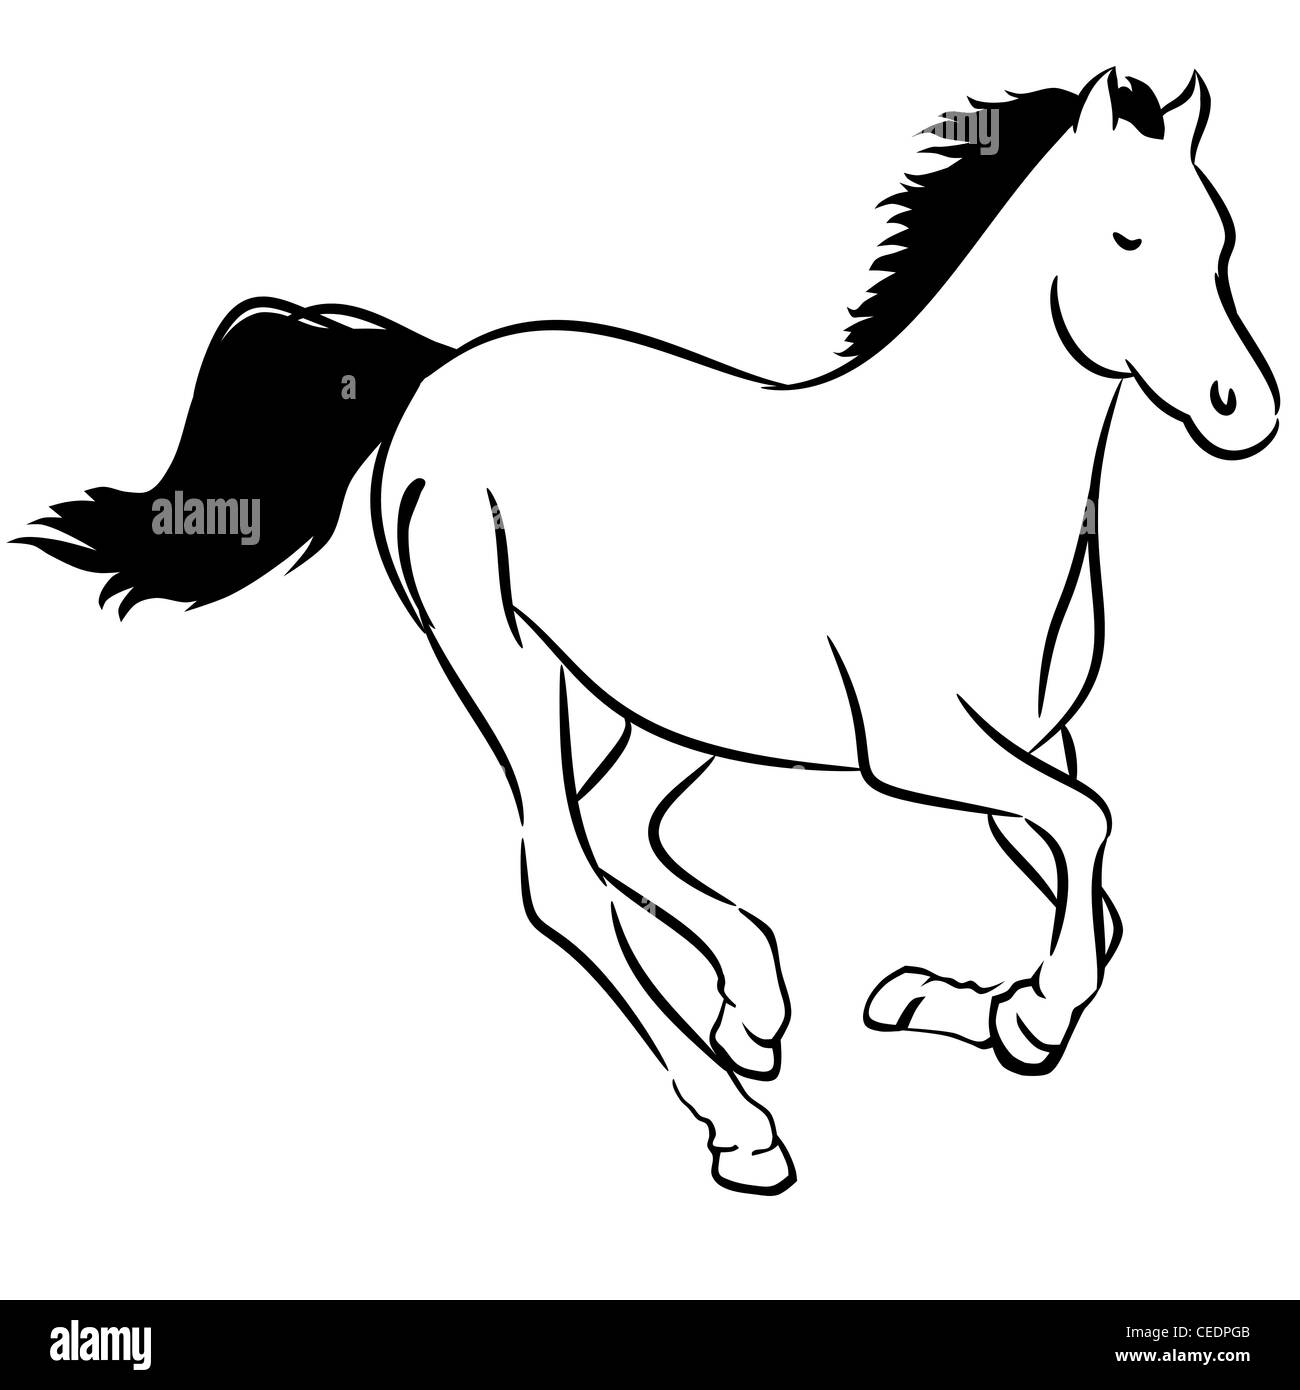 Running horse, line drawing Stock Photo - Alamy